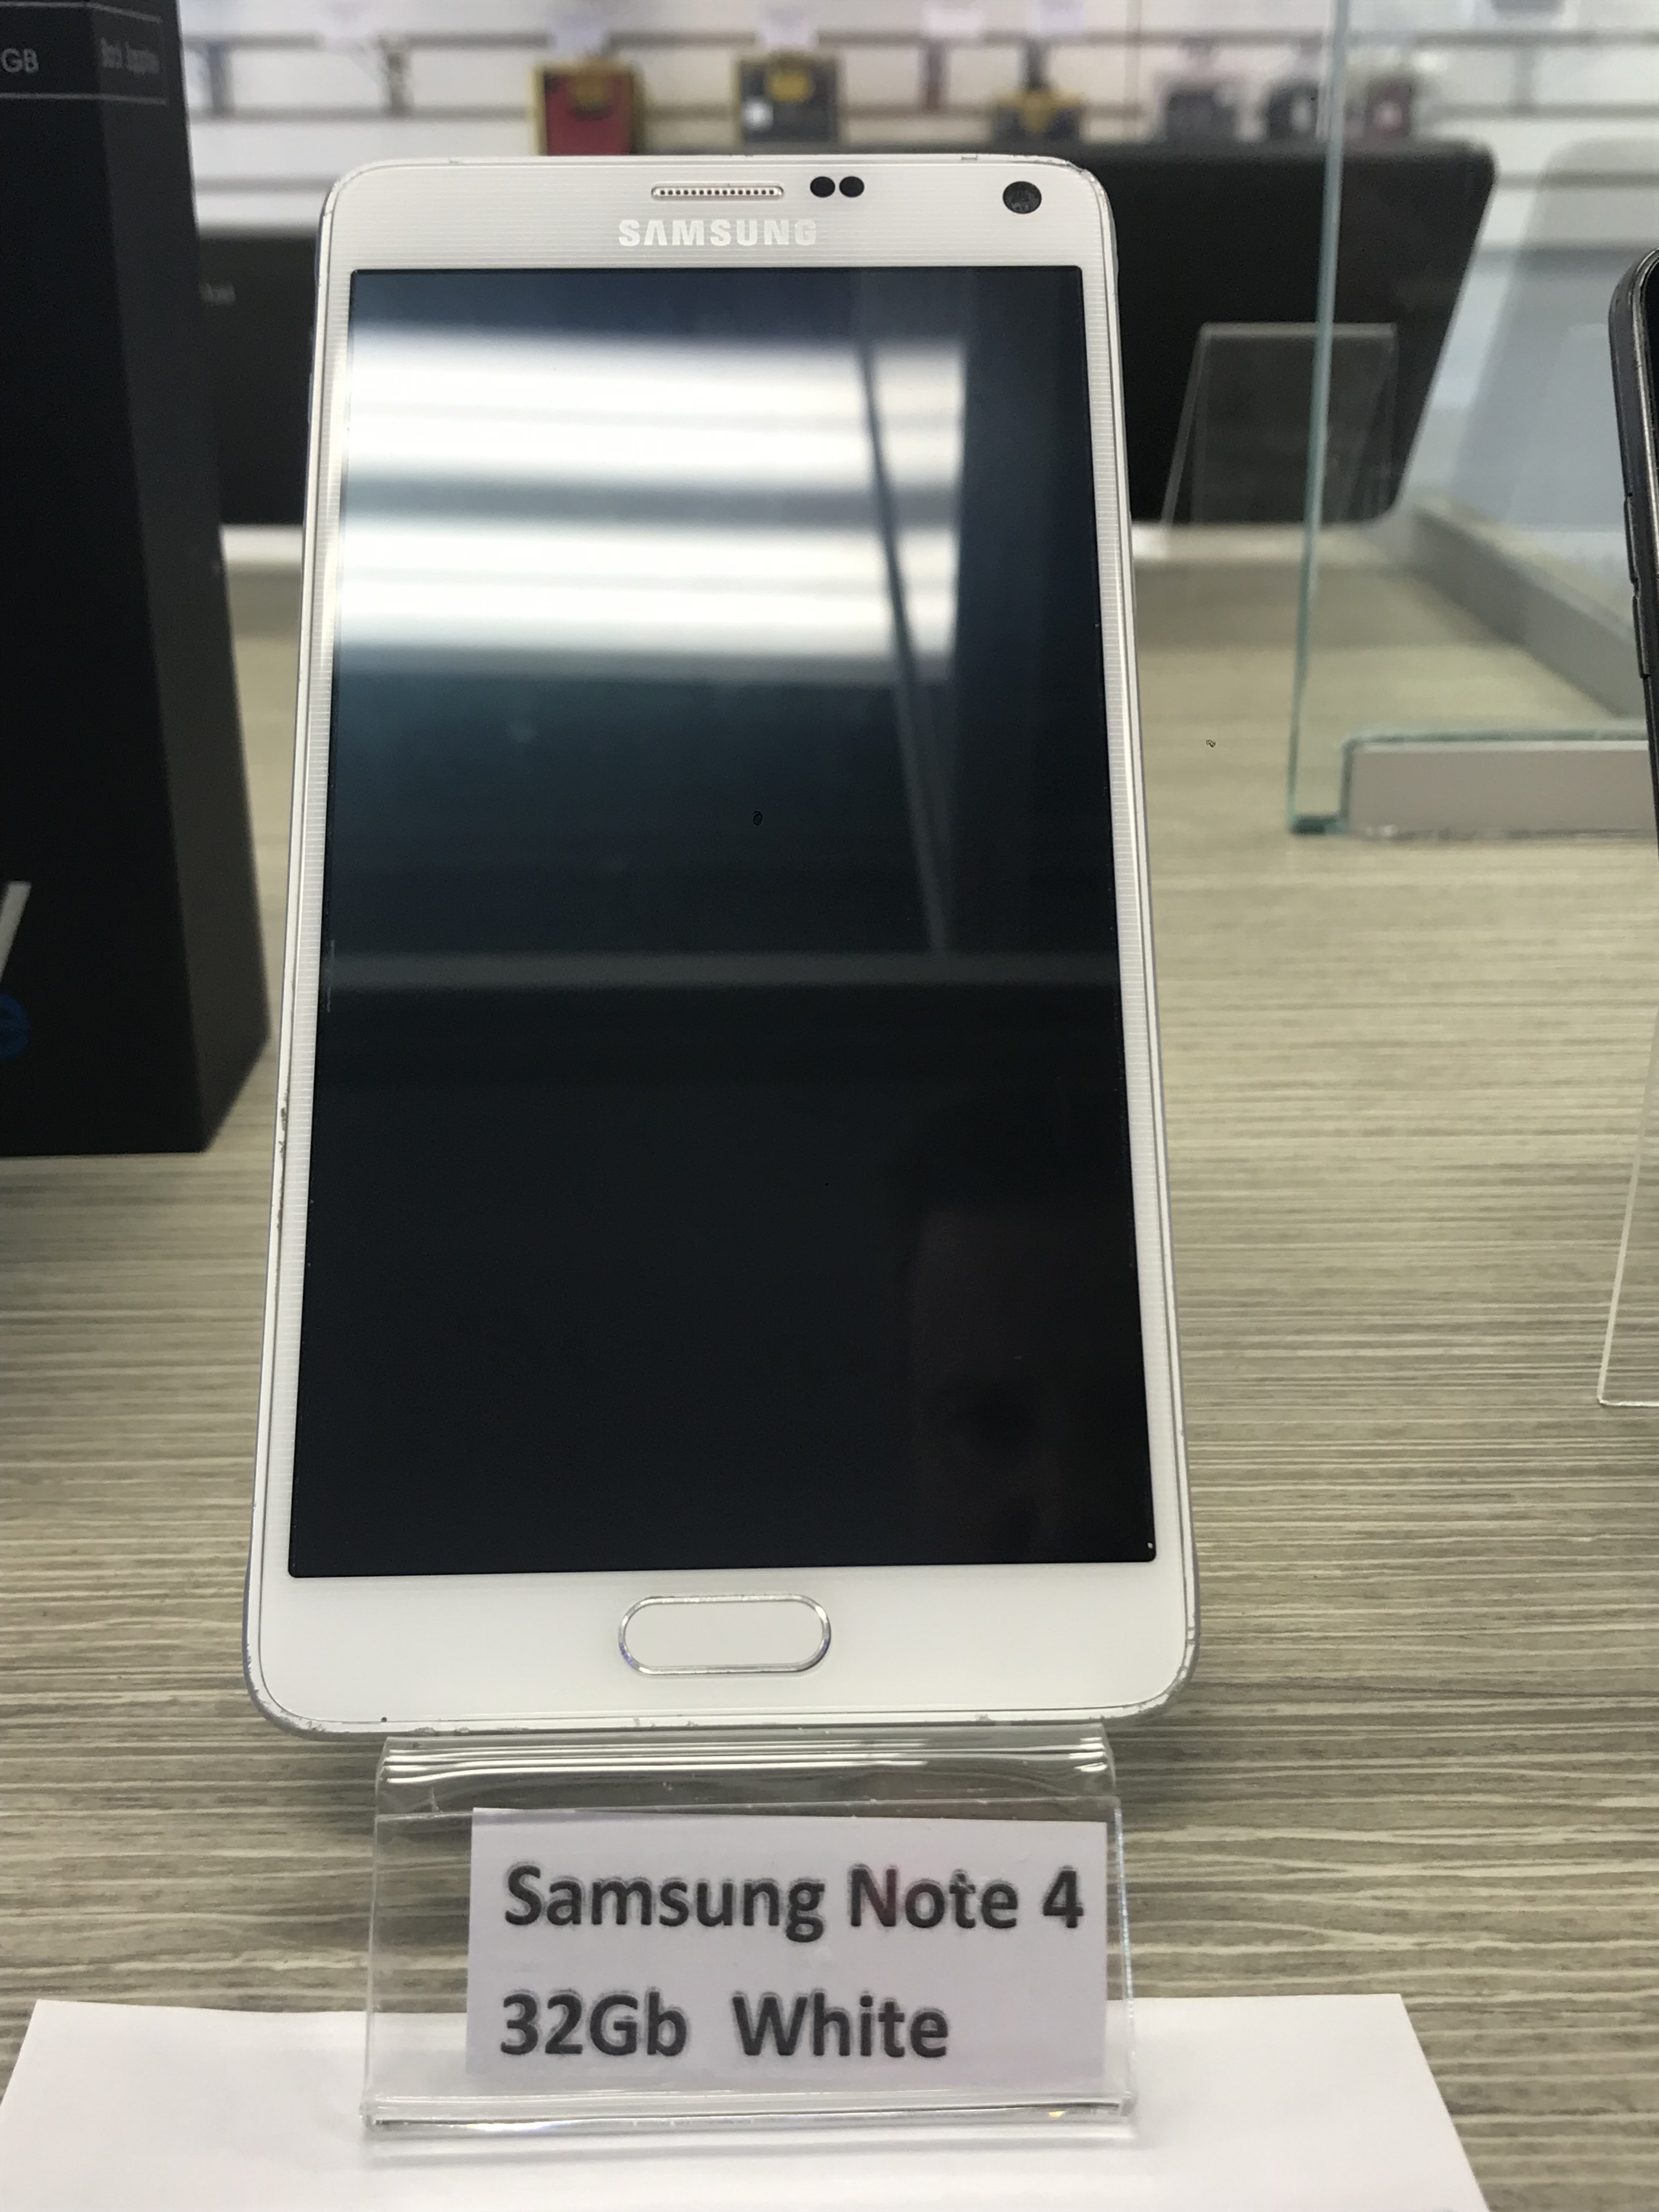 Samsung Note 4 32Gb White for sale